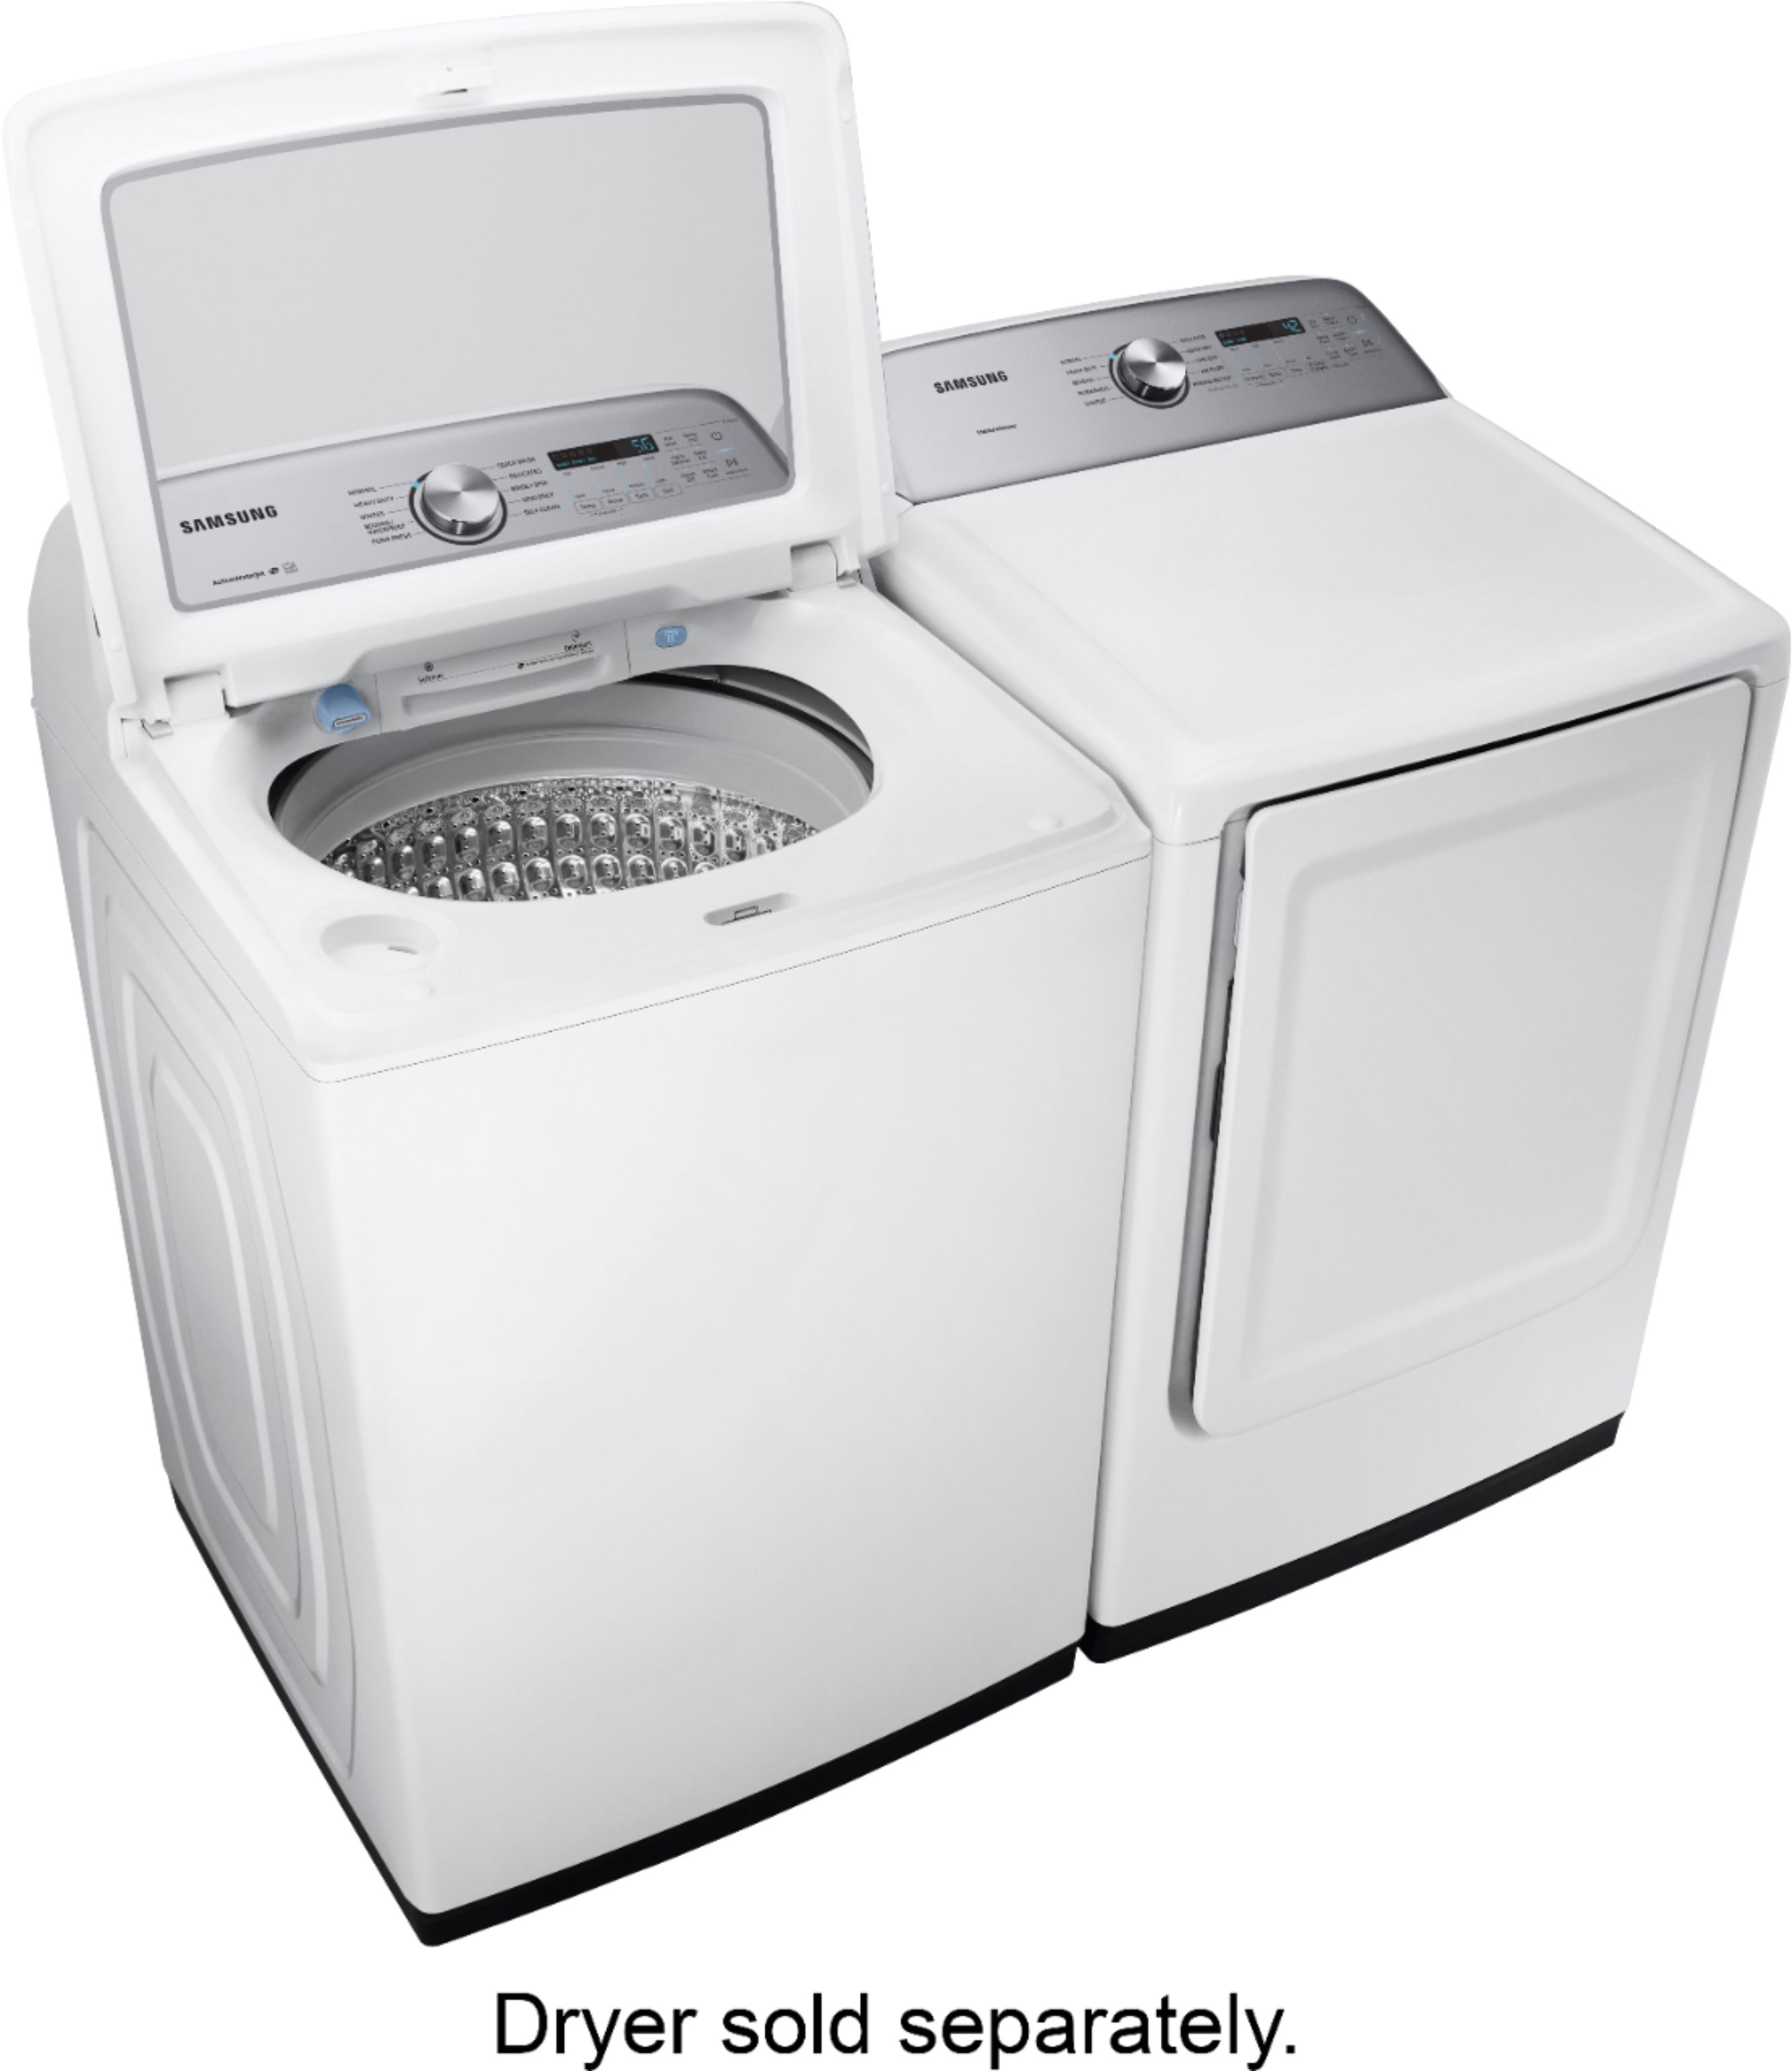 Samsung 5 0 Cu Ft High Efficiency Top Load Washer With Active Waterjet White Wa50r50aw Us Best Buy